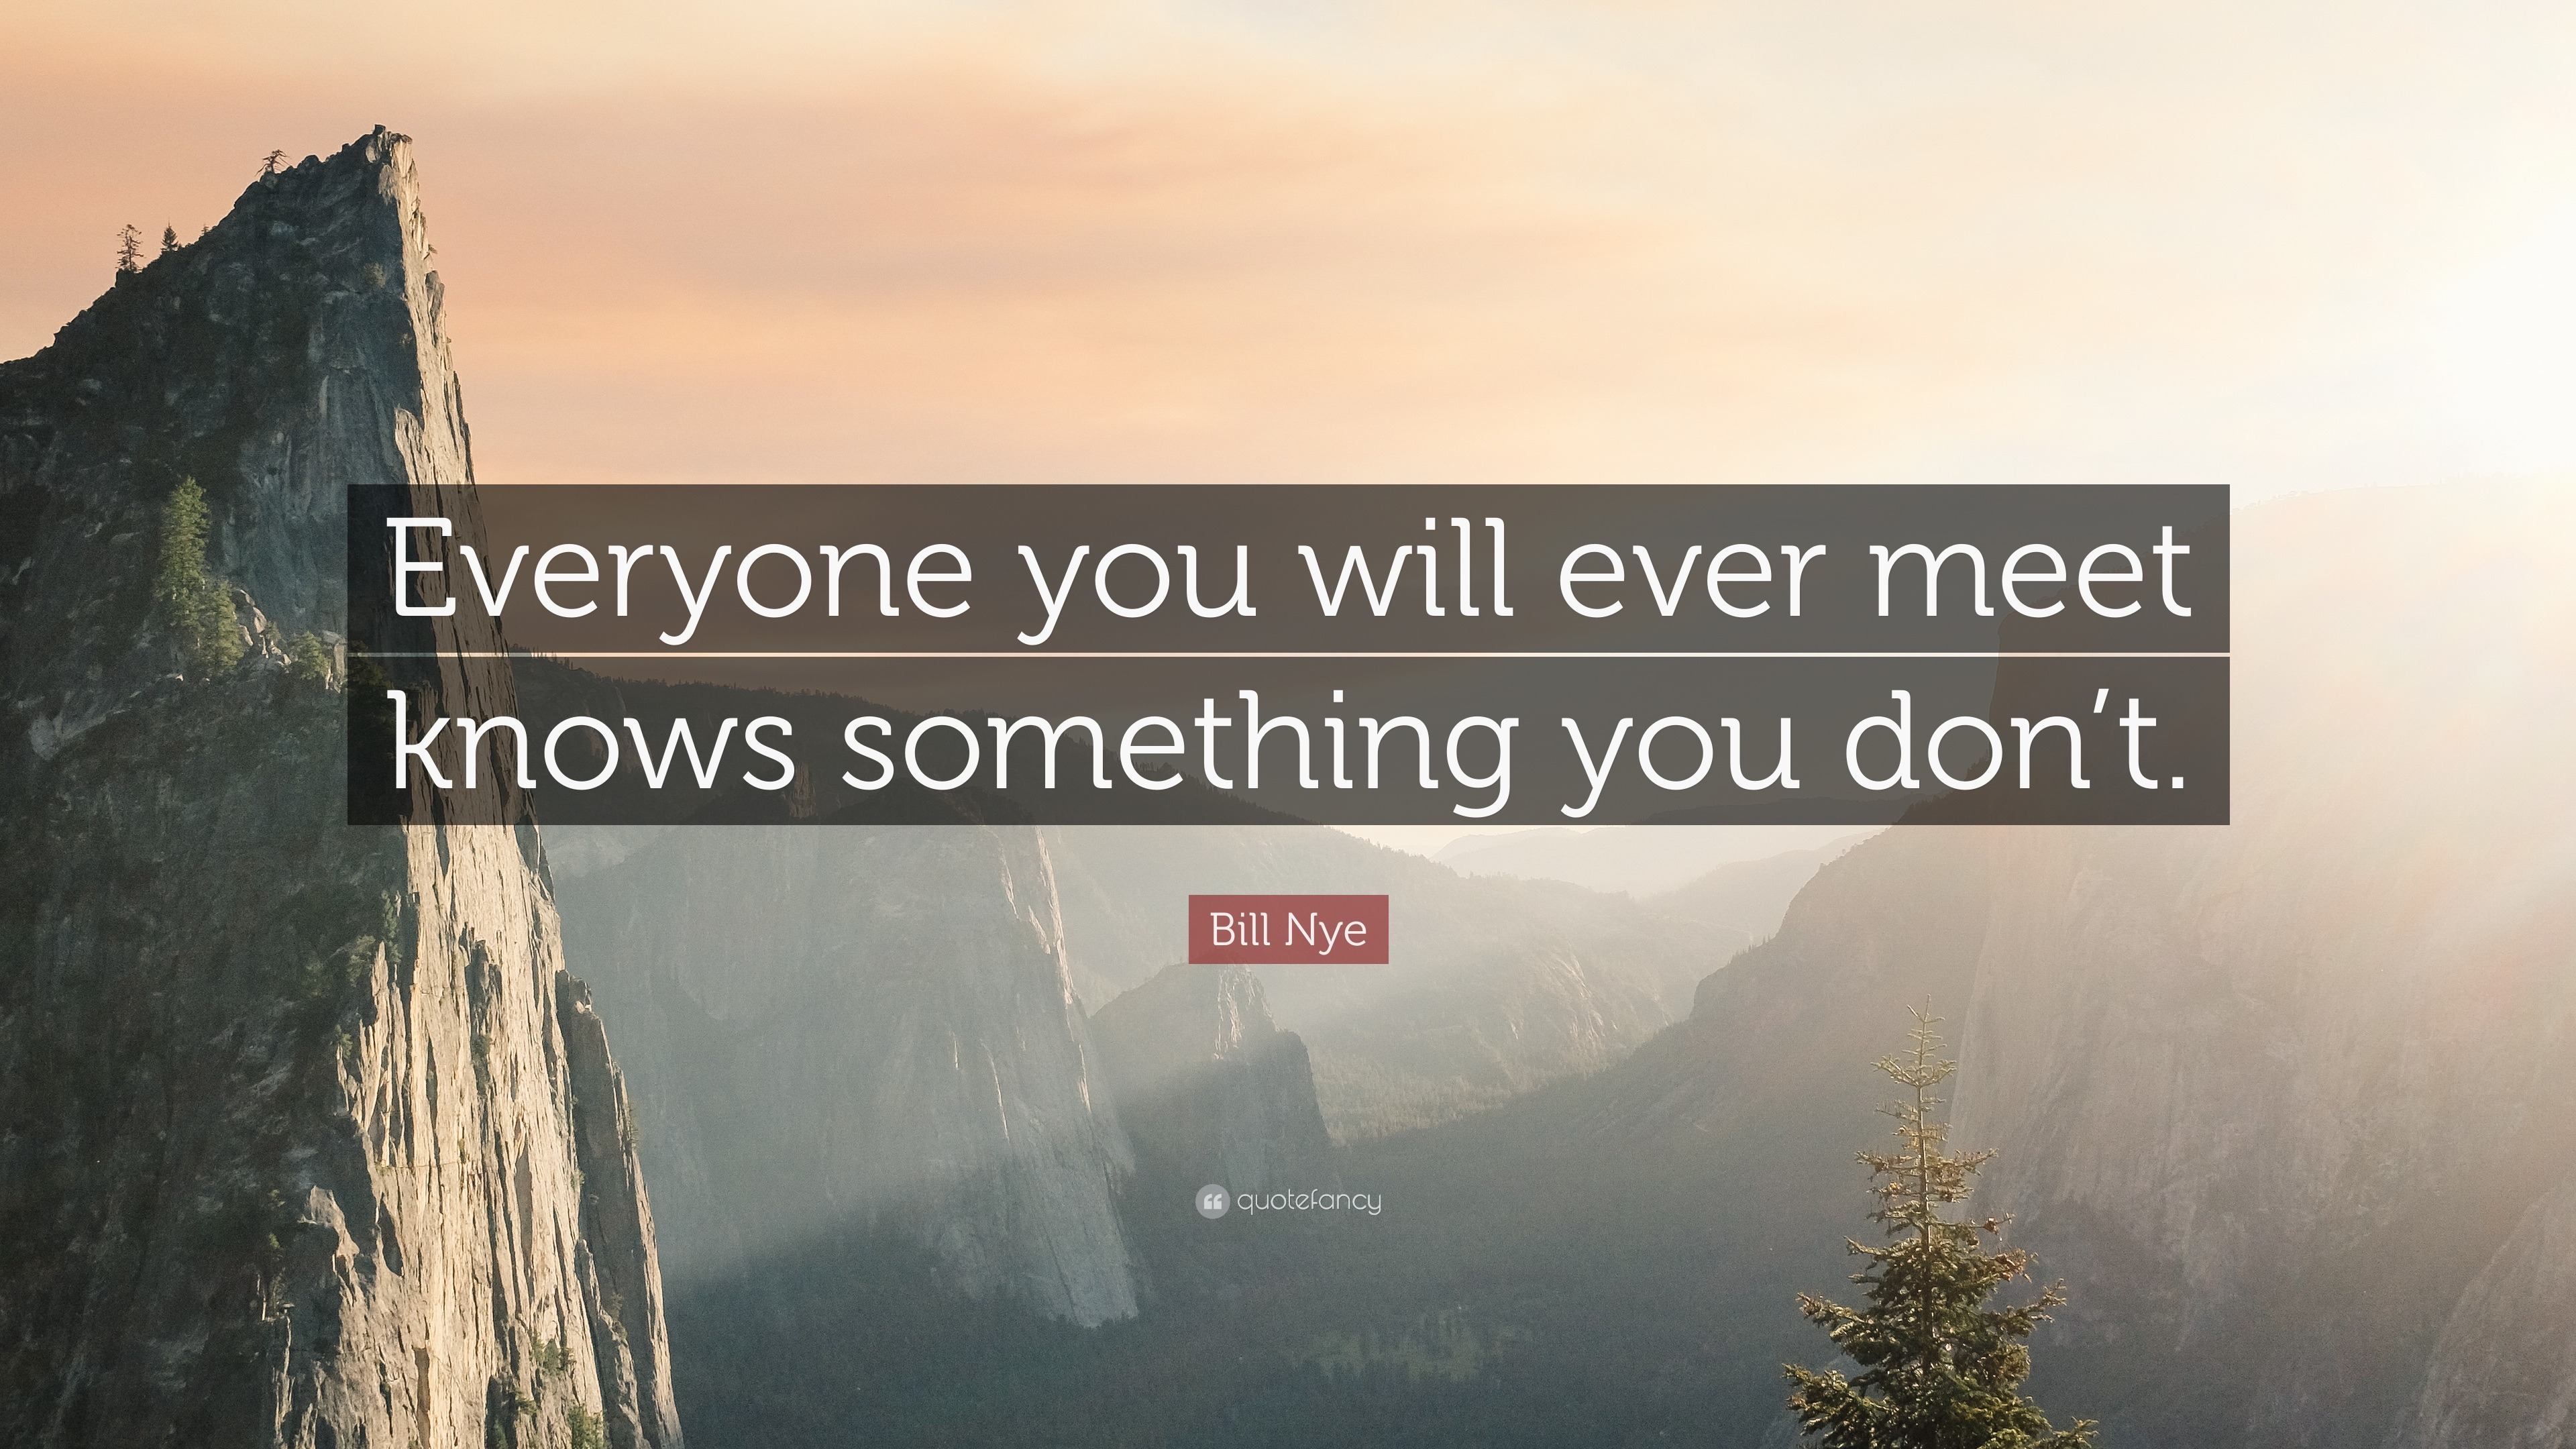 Bill Nye Quote: “Everyone you will ever meet knows something you don’t.”